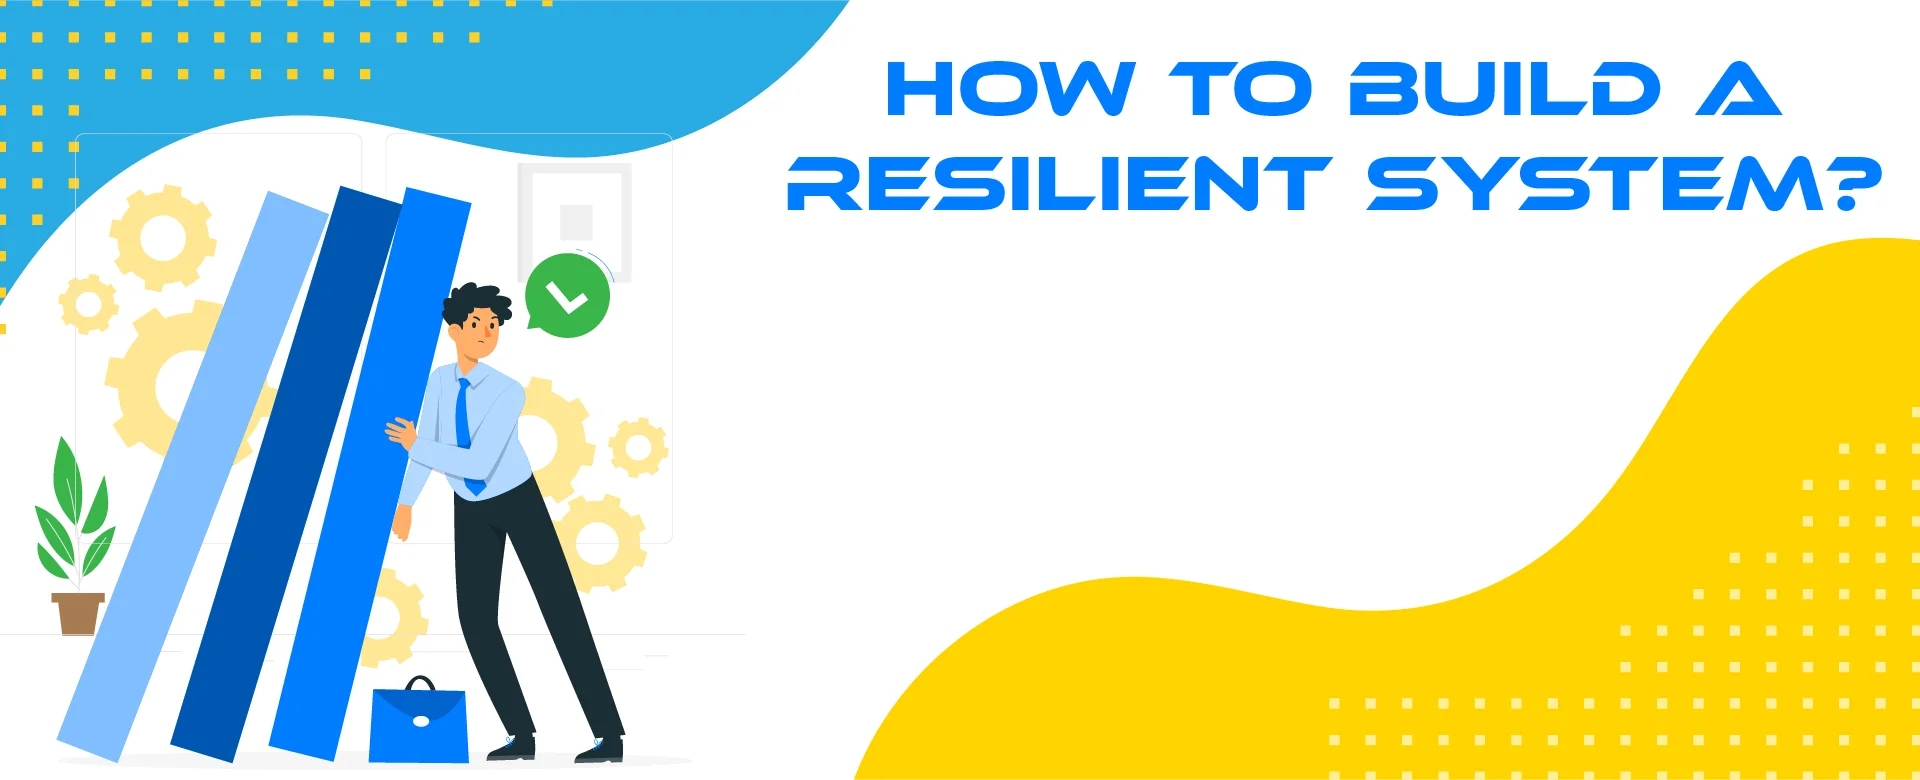 How to build a resilient system